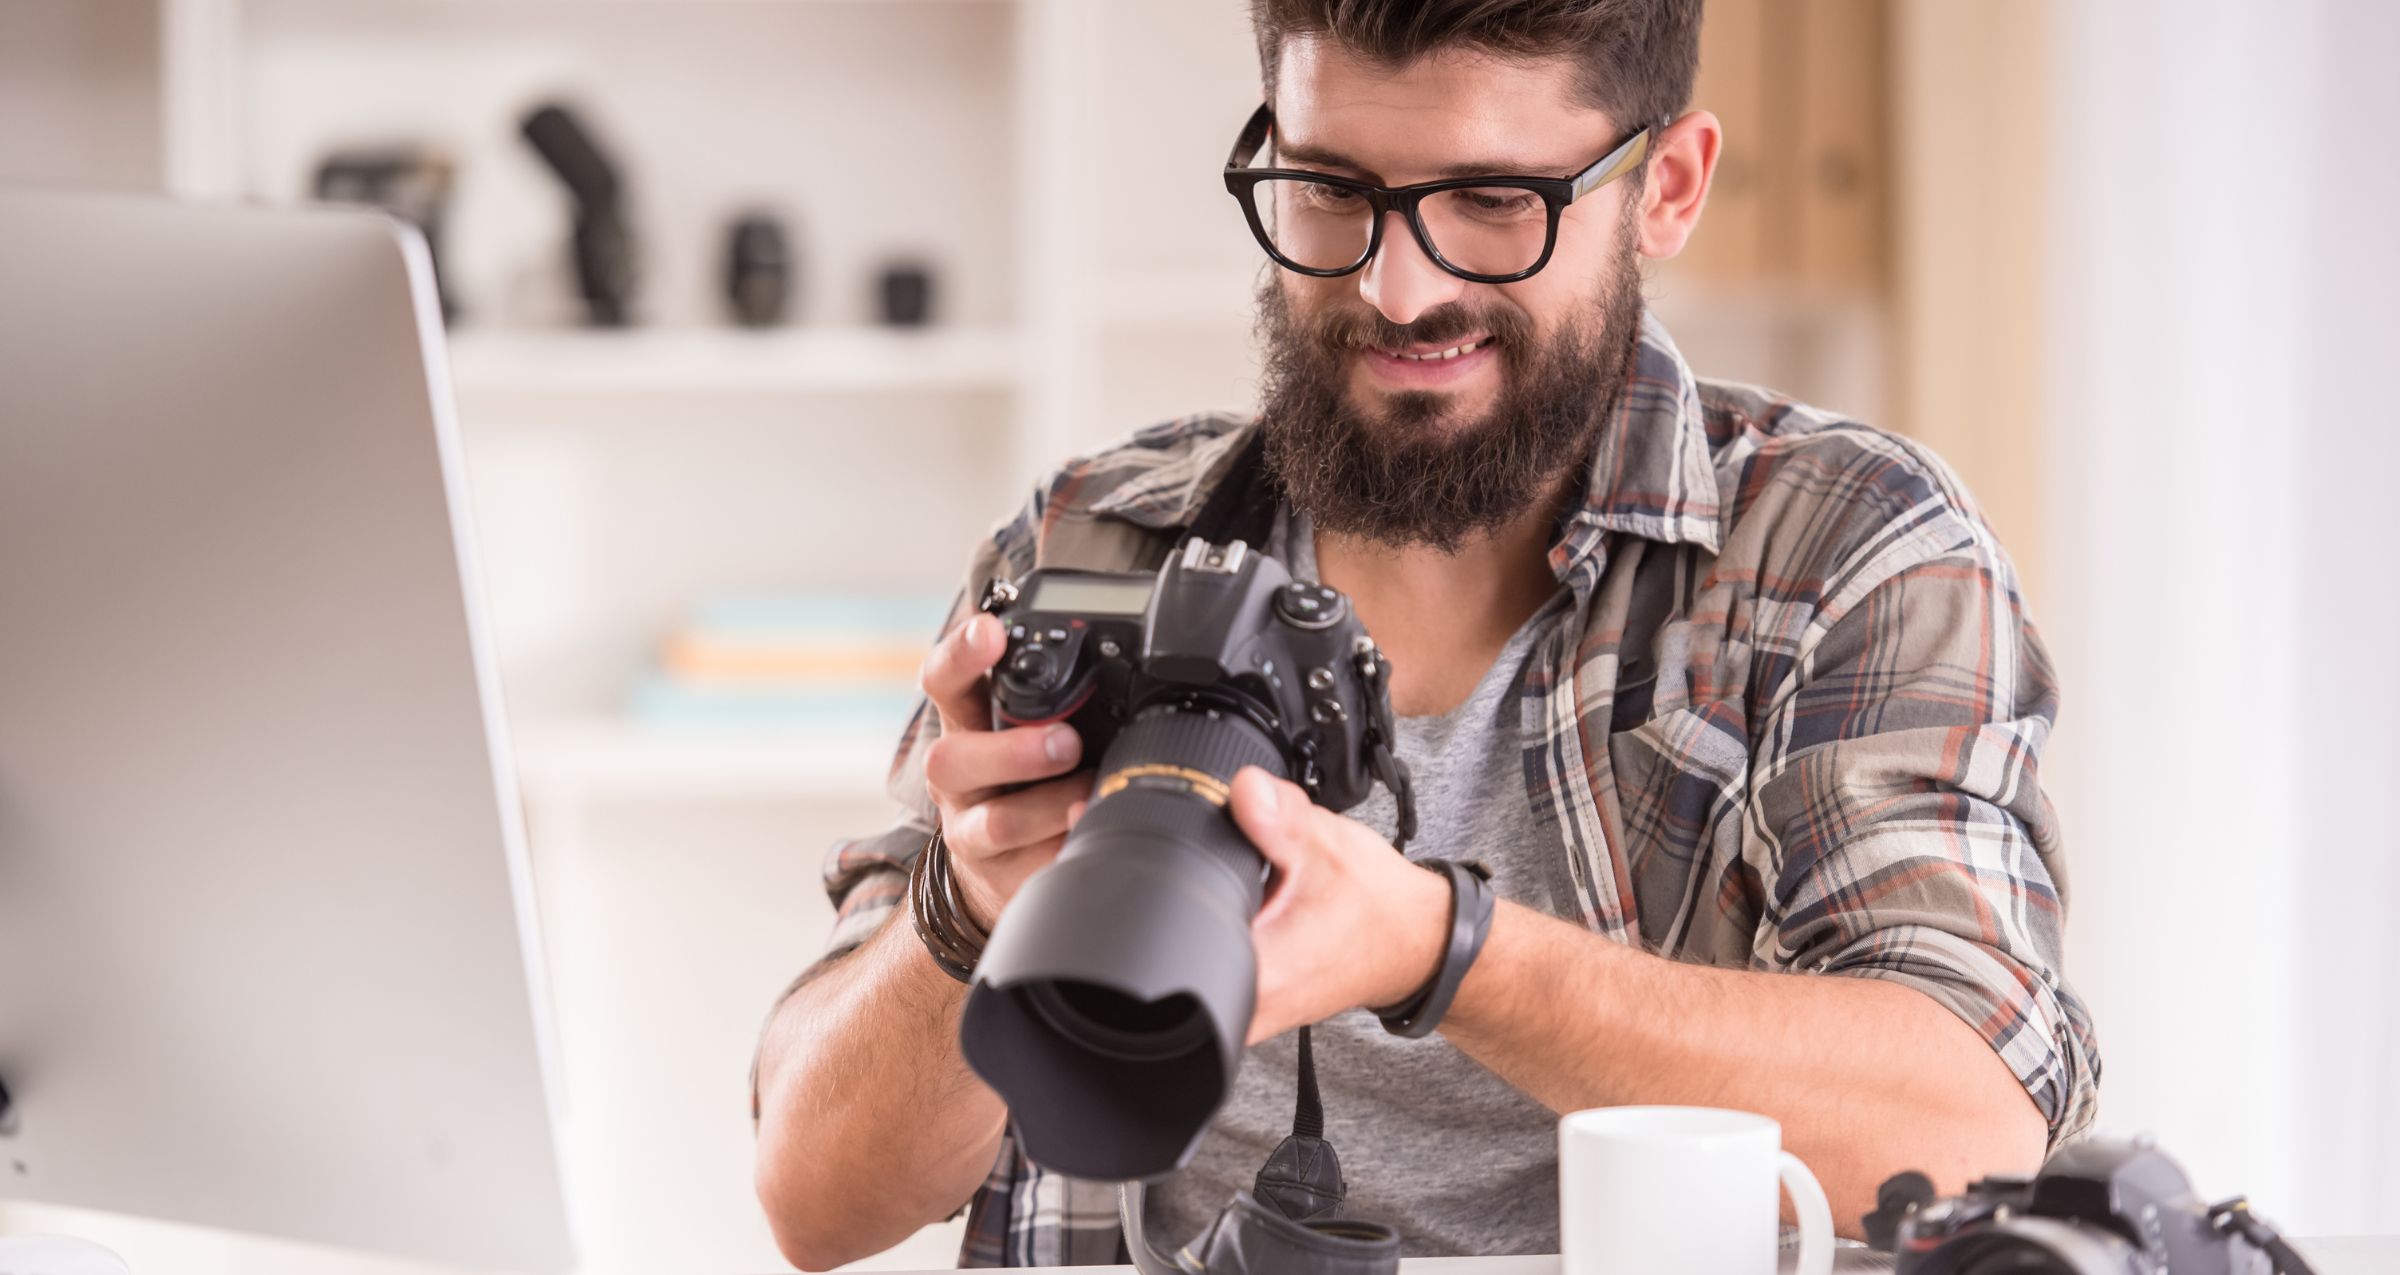 10 Tips For Successful Website Photoshoots